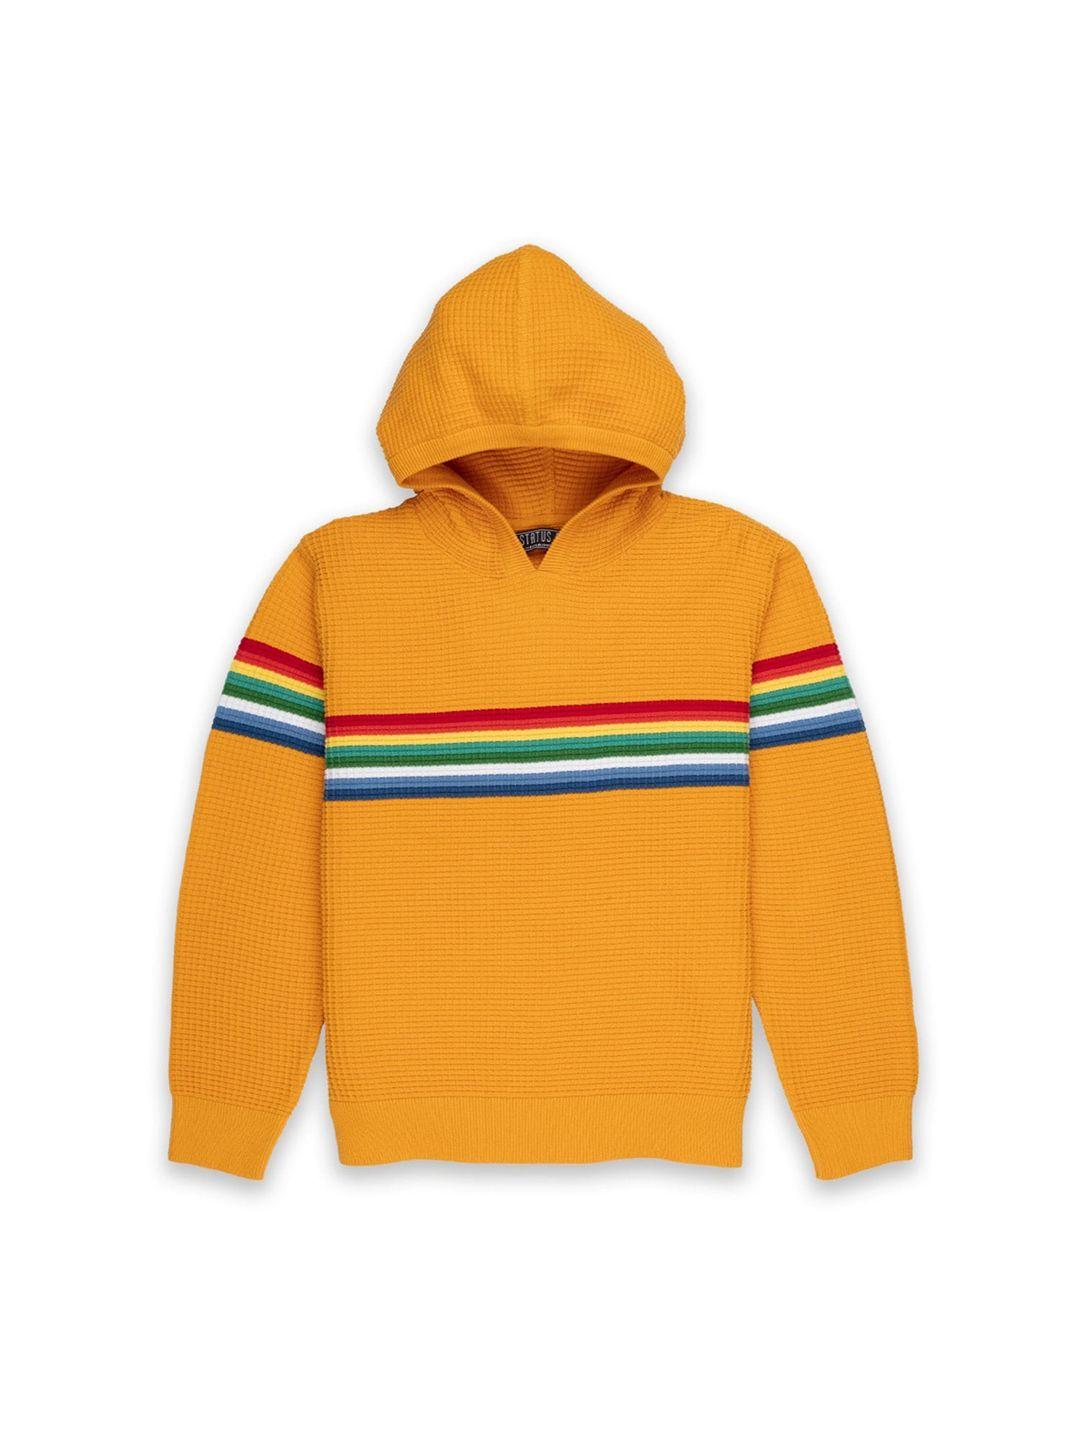 status quo boys yellow & blue striped pullover